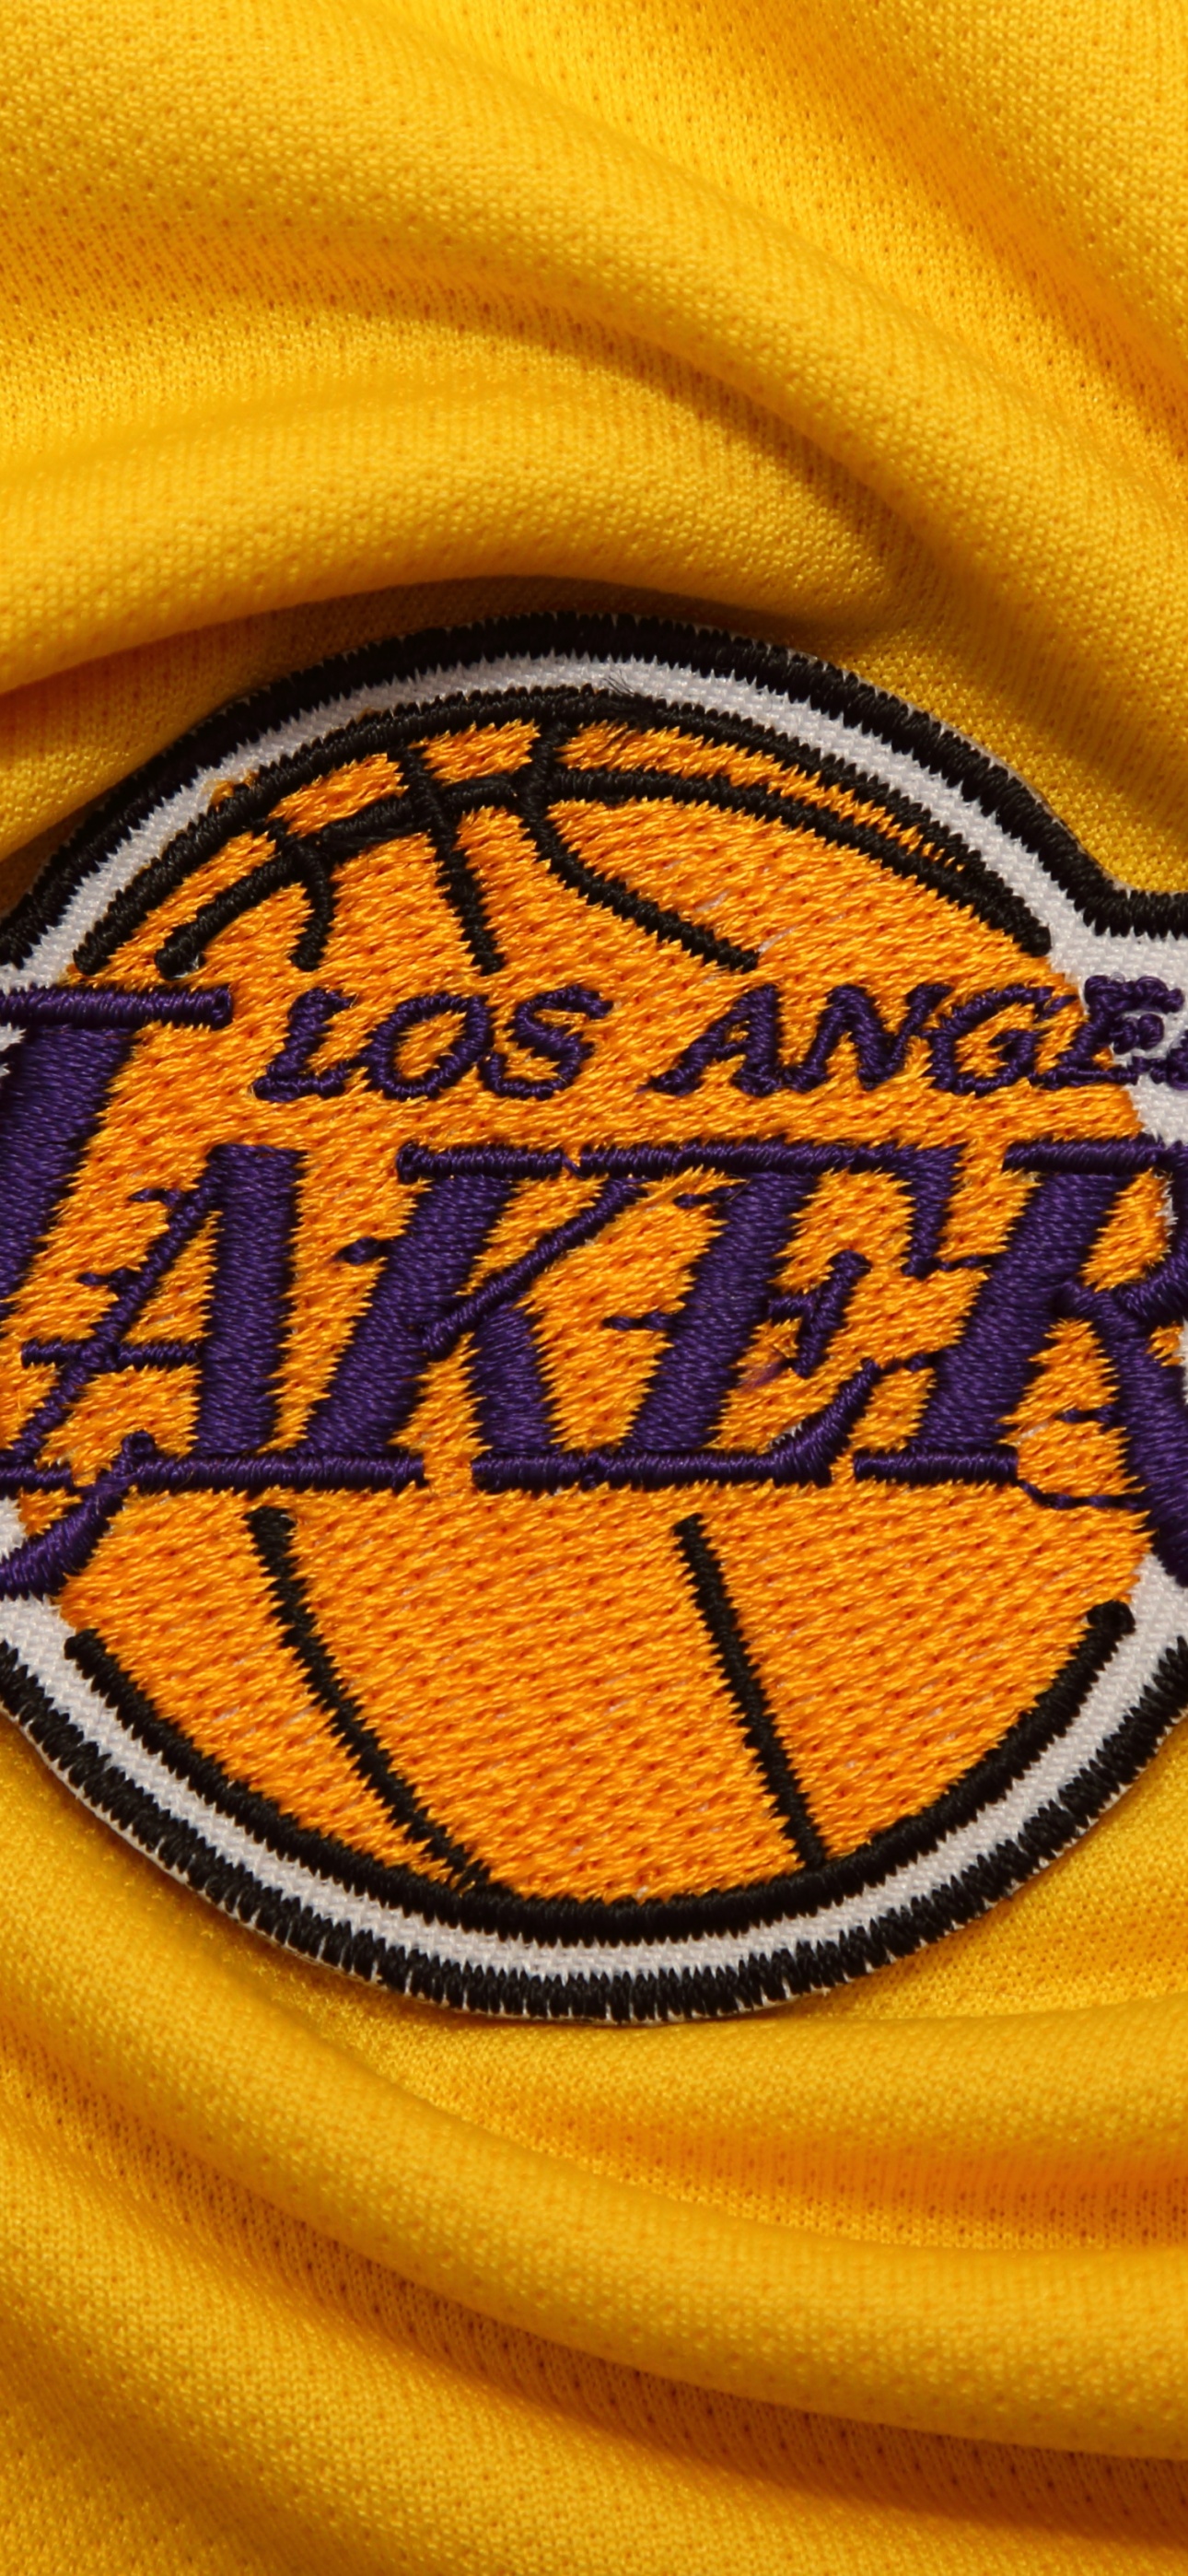 400+] Lakers Wallpapers | Wallpapers.com